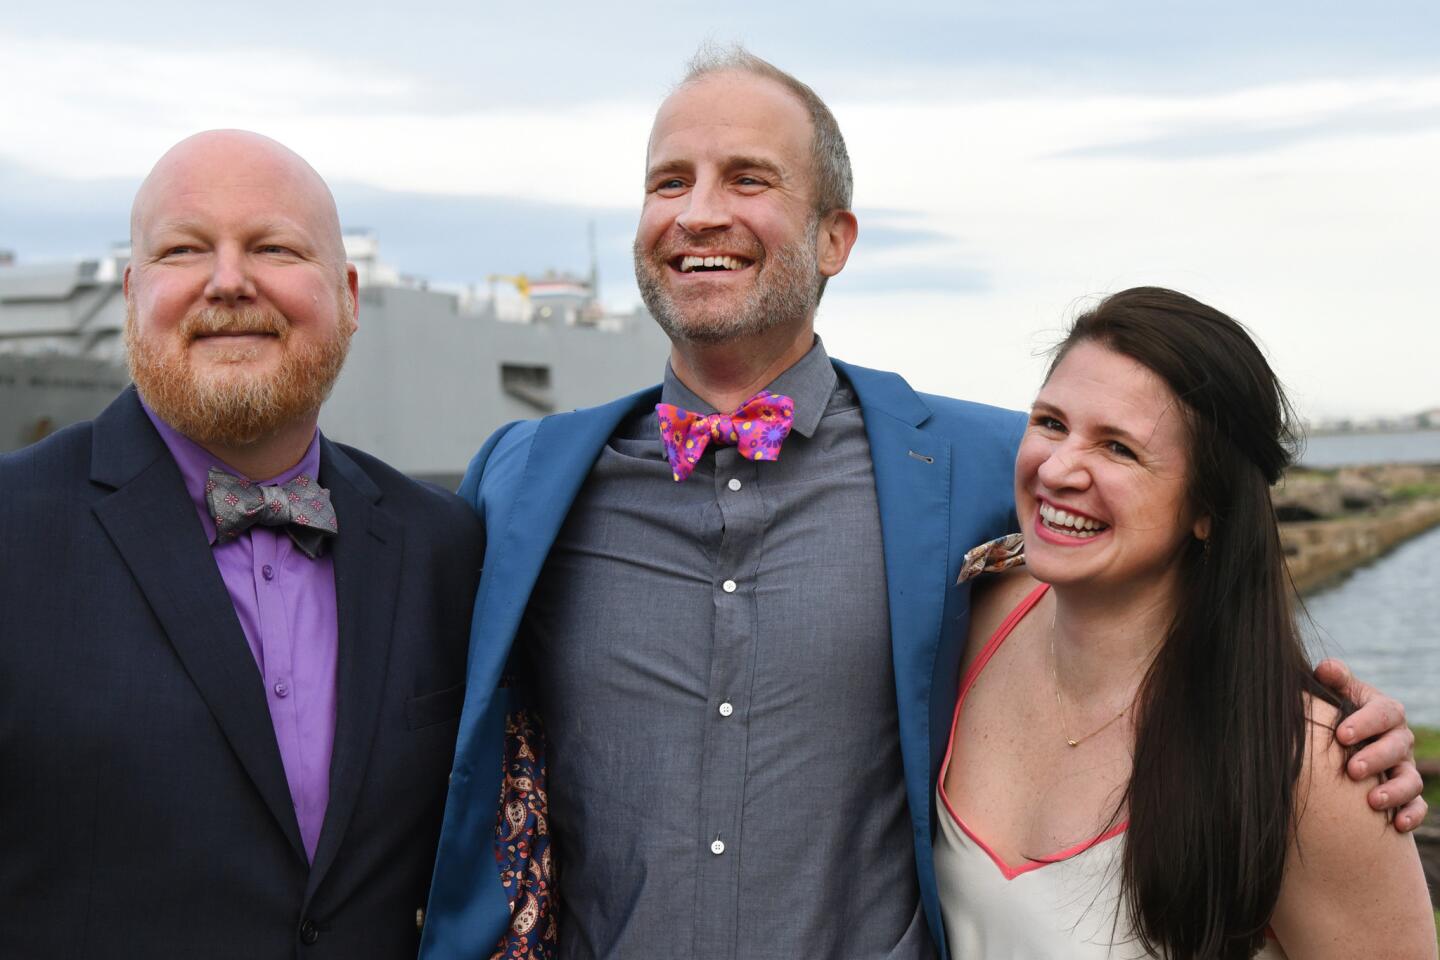 From left, Thomas Pomroy, Rich Morrissey and Samantha Gallup at the Bourbon and Bowties charity fundraiser held at Rye Street Tavern in Port Covington.